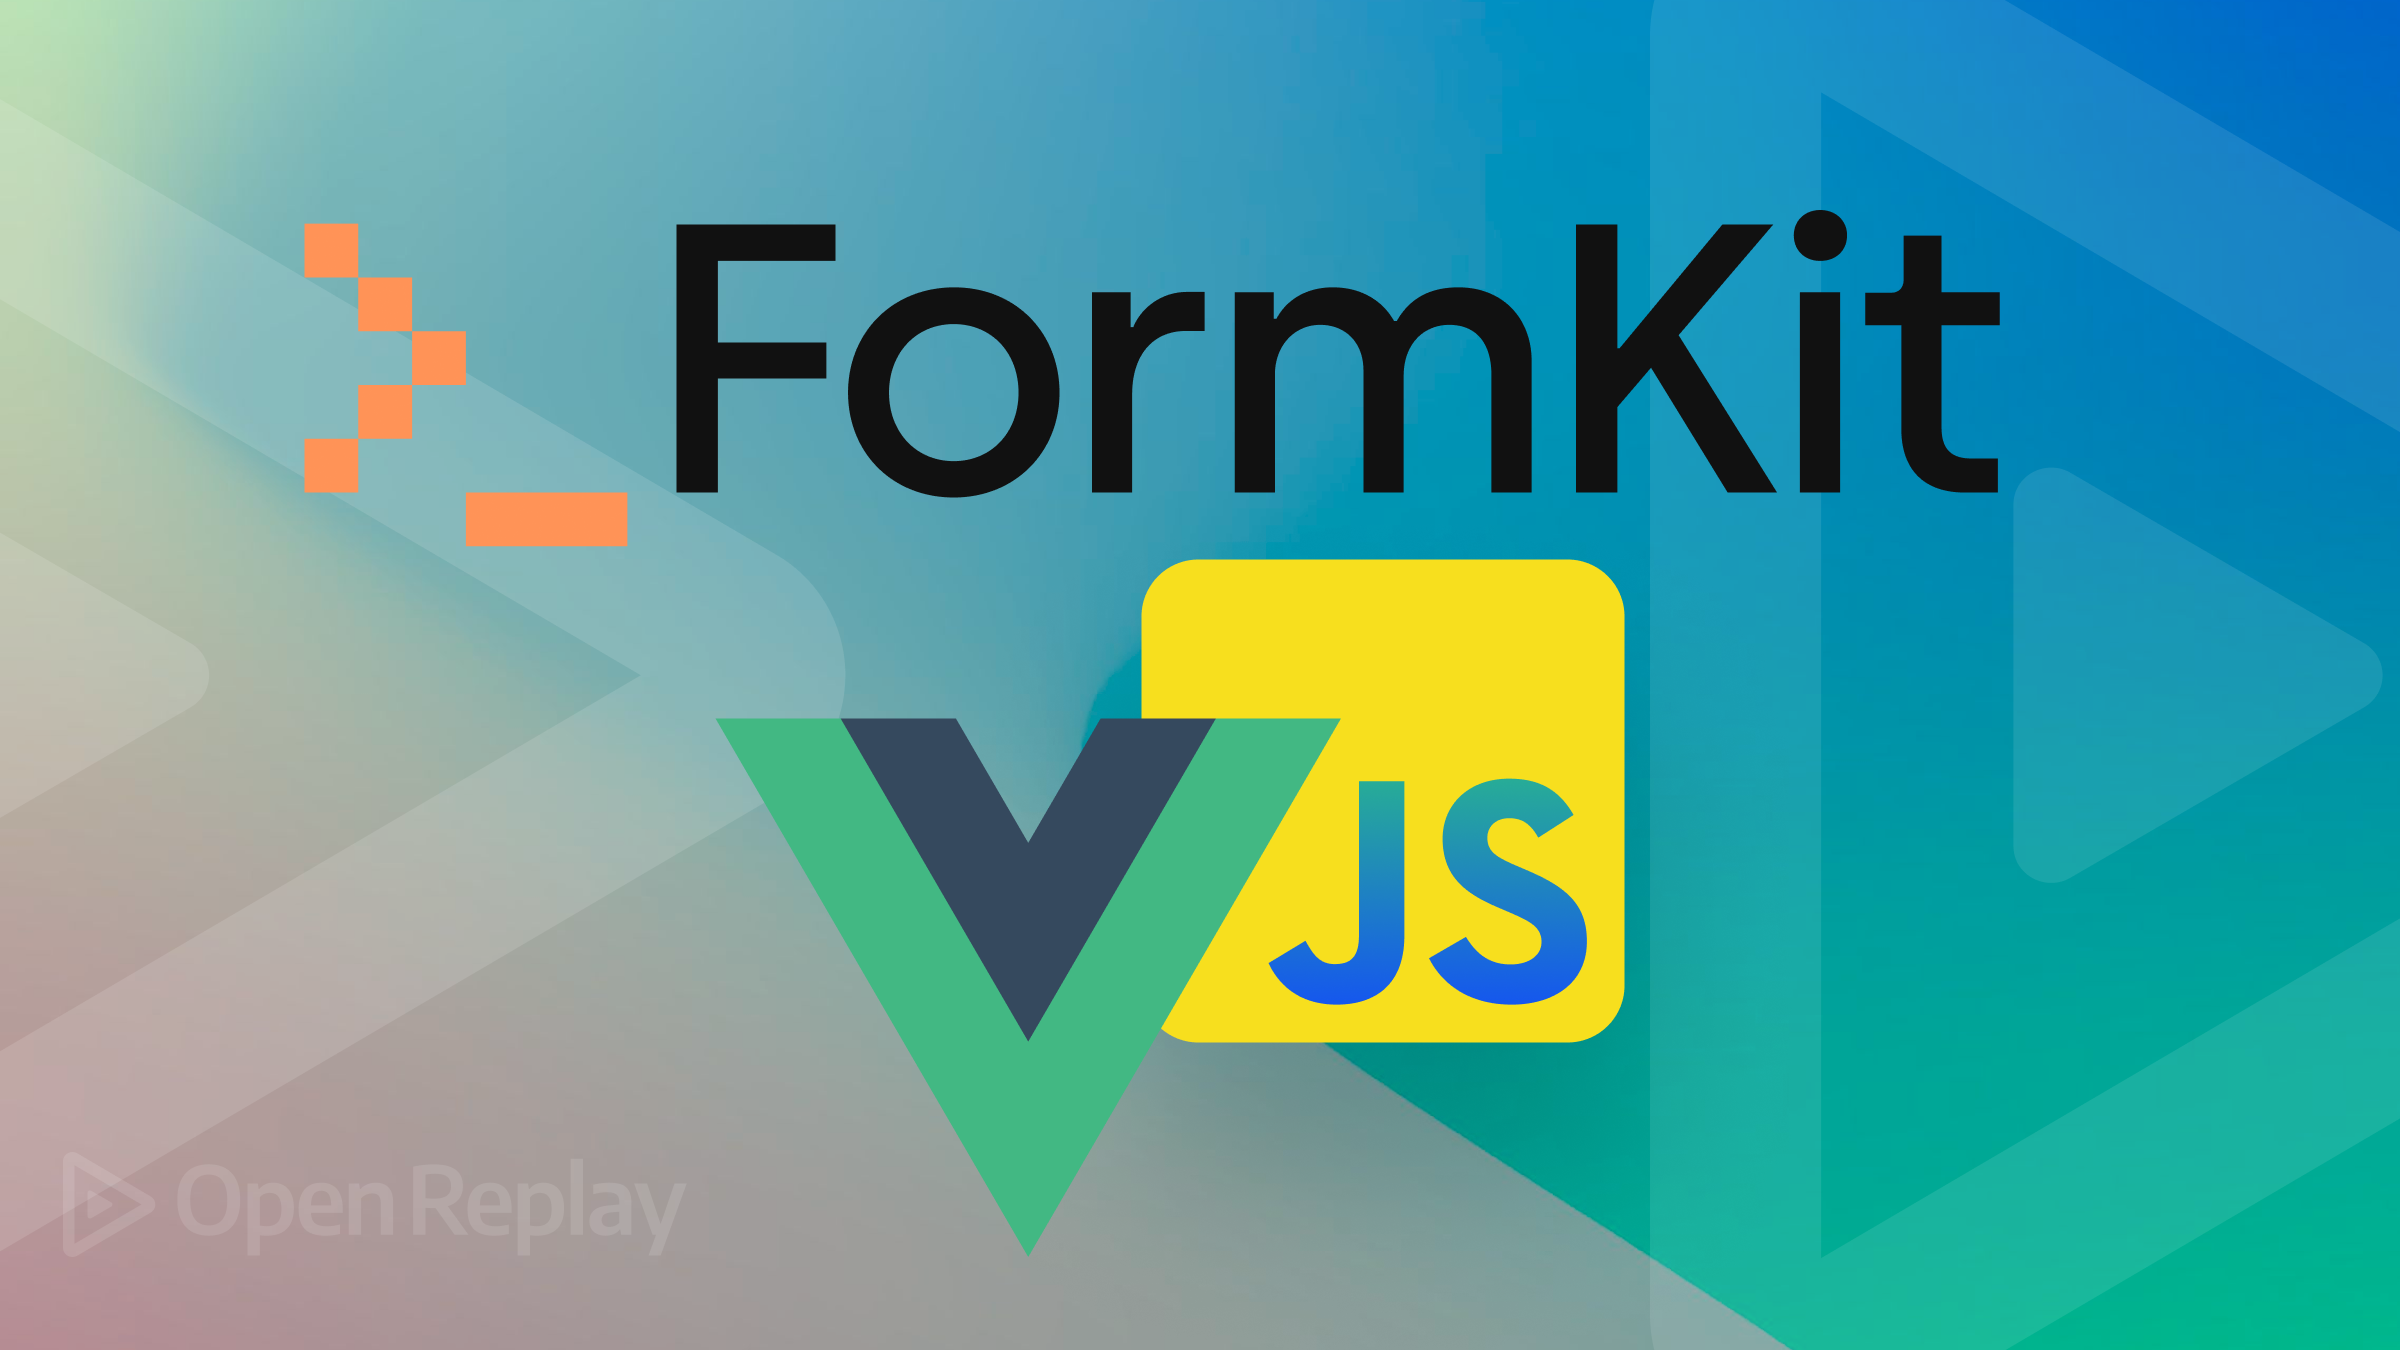 How to build Vue.js forms with FormKit